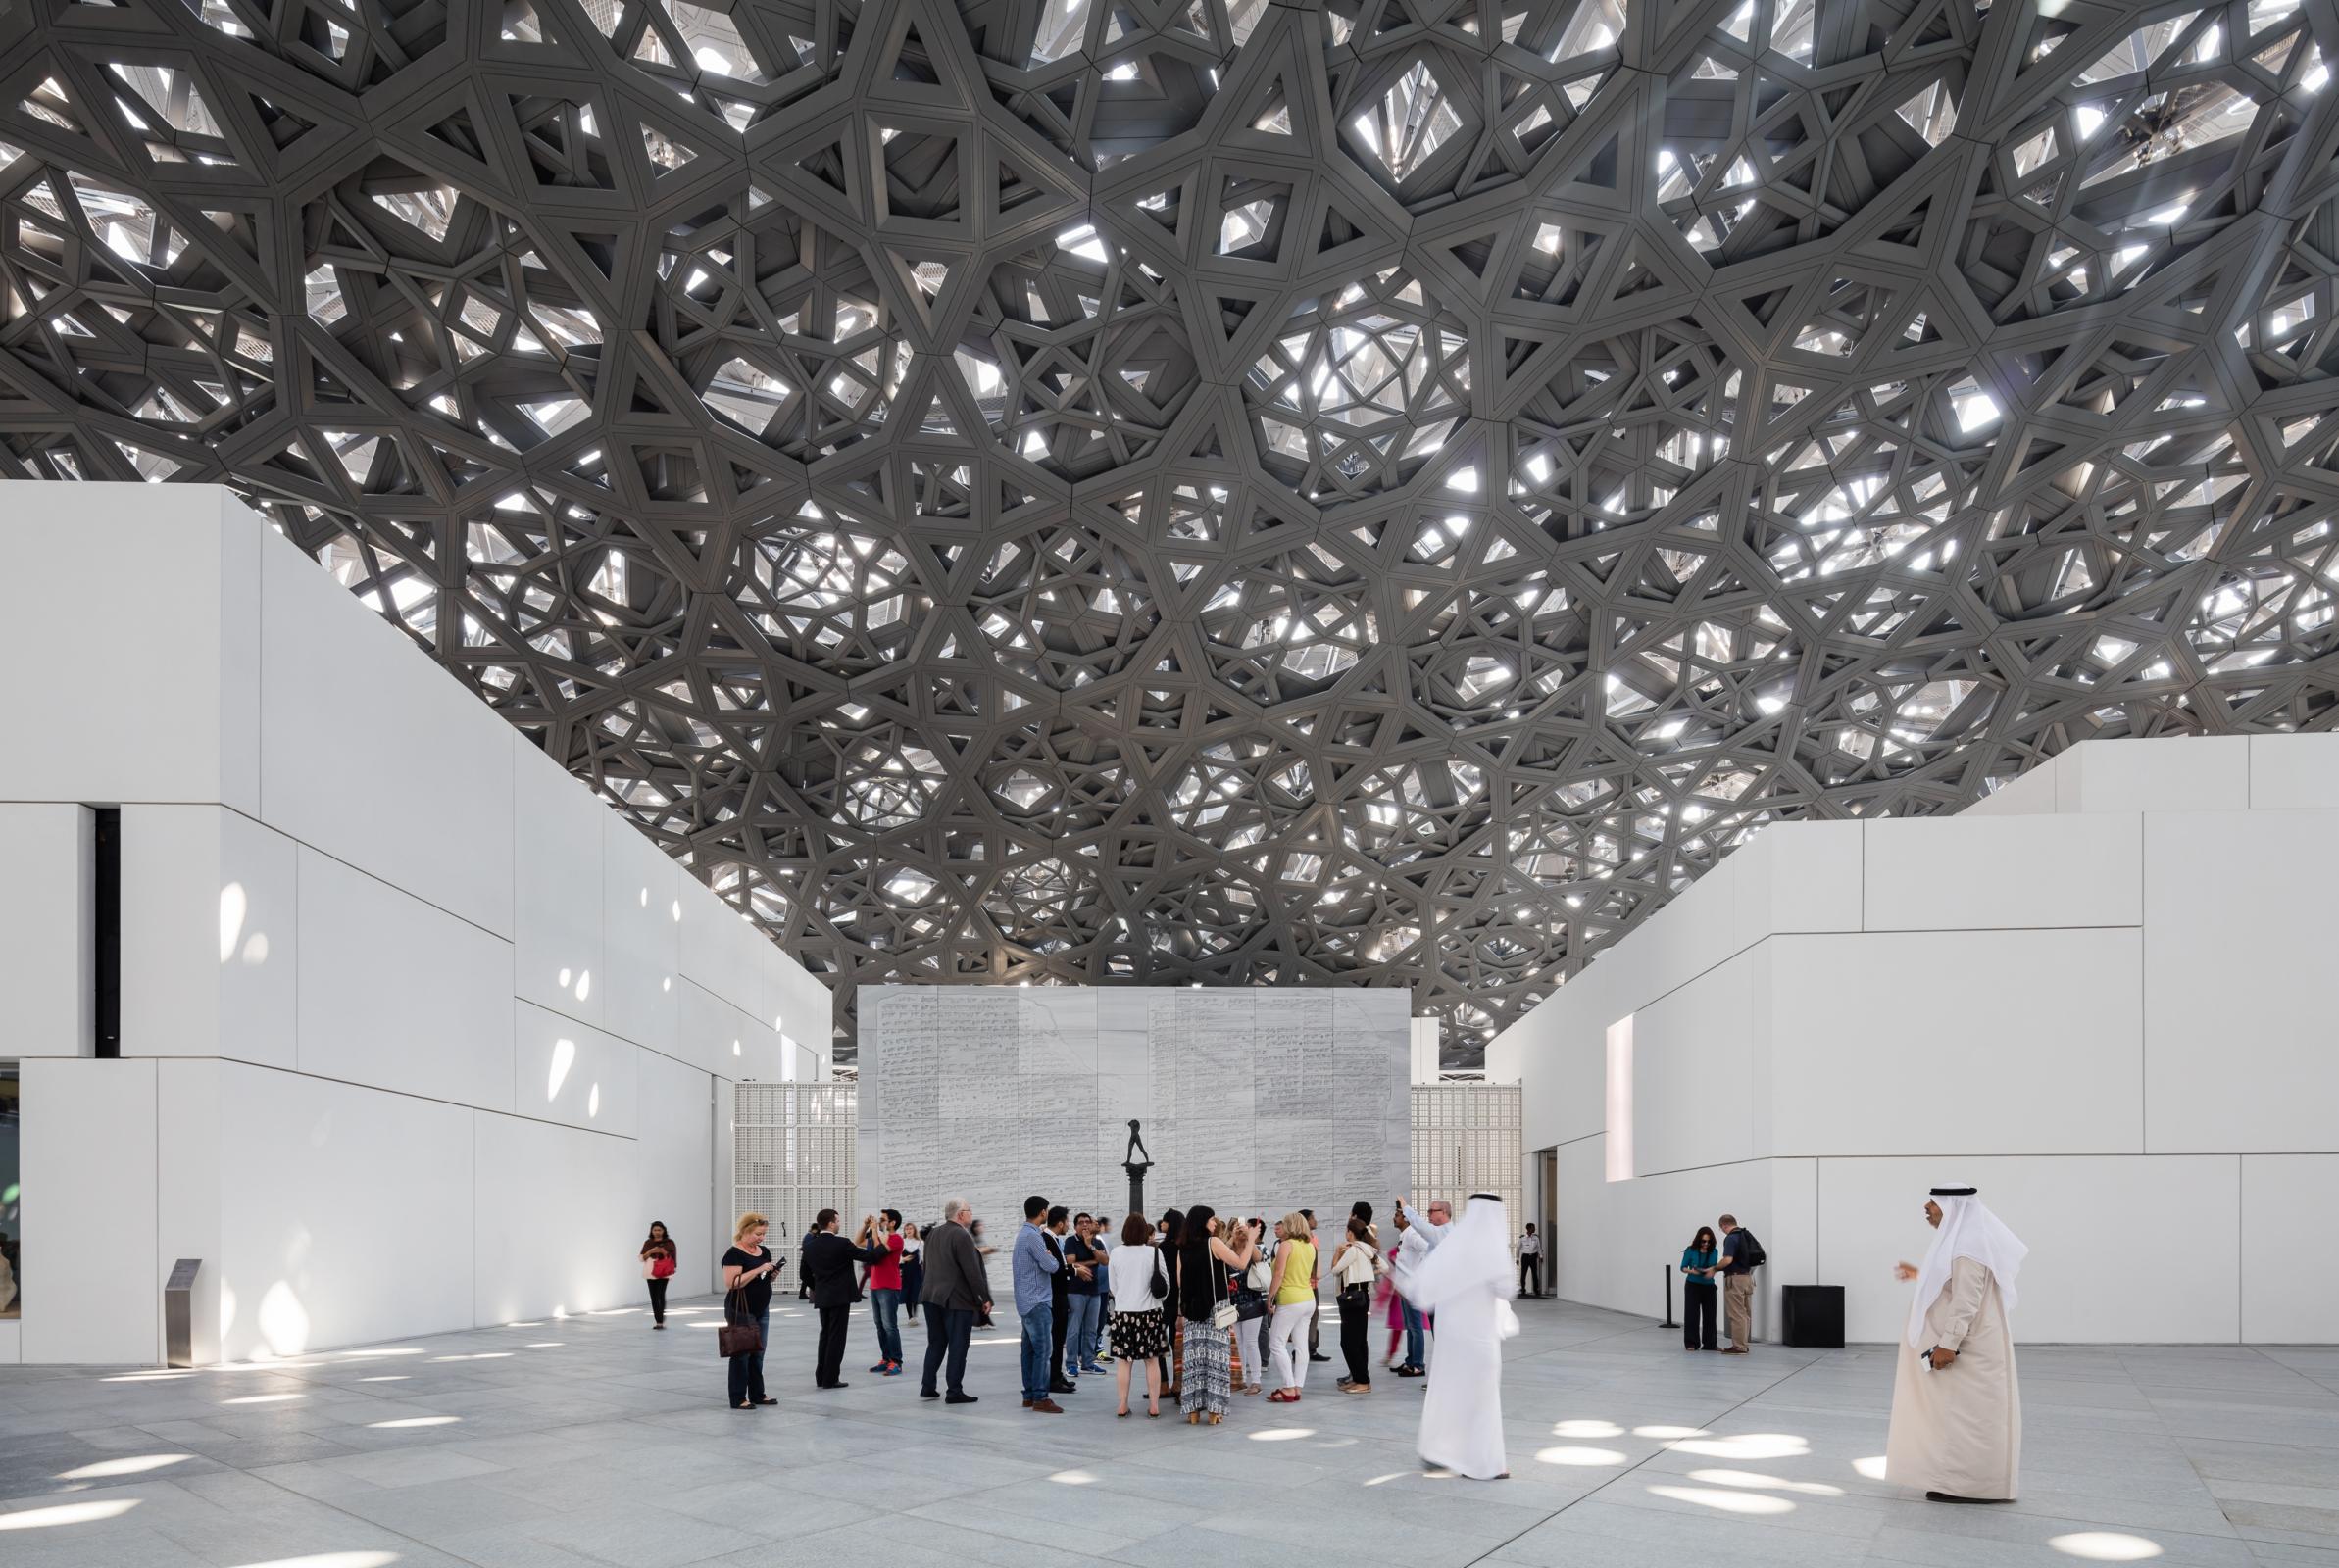 Photograph of Louvre Abu Dhabi, designed by Ateliers Jean Nouvel and located in Abu Dhabi, United Arab Emirates